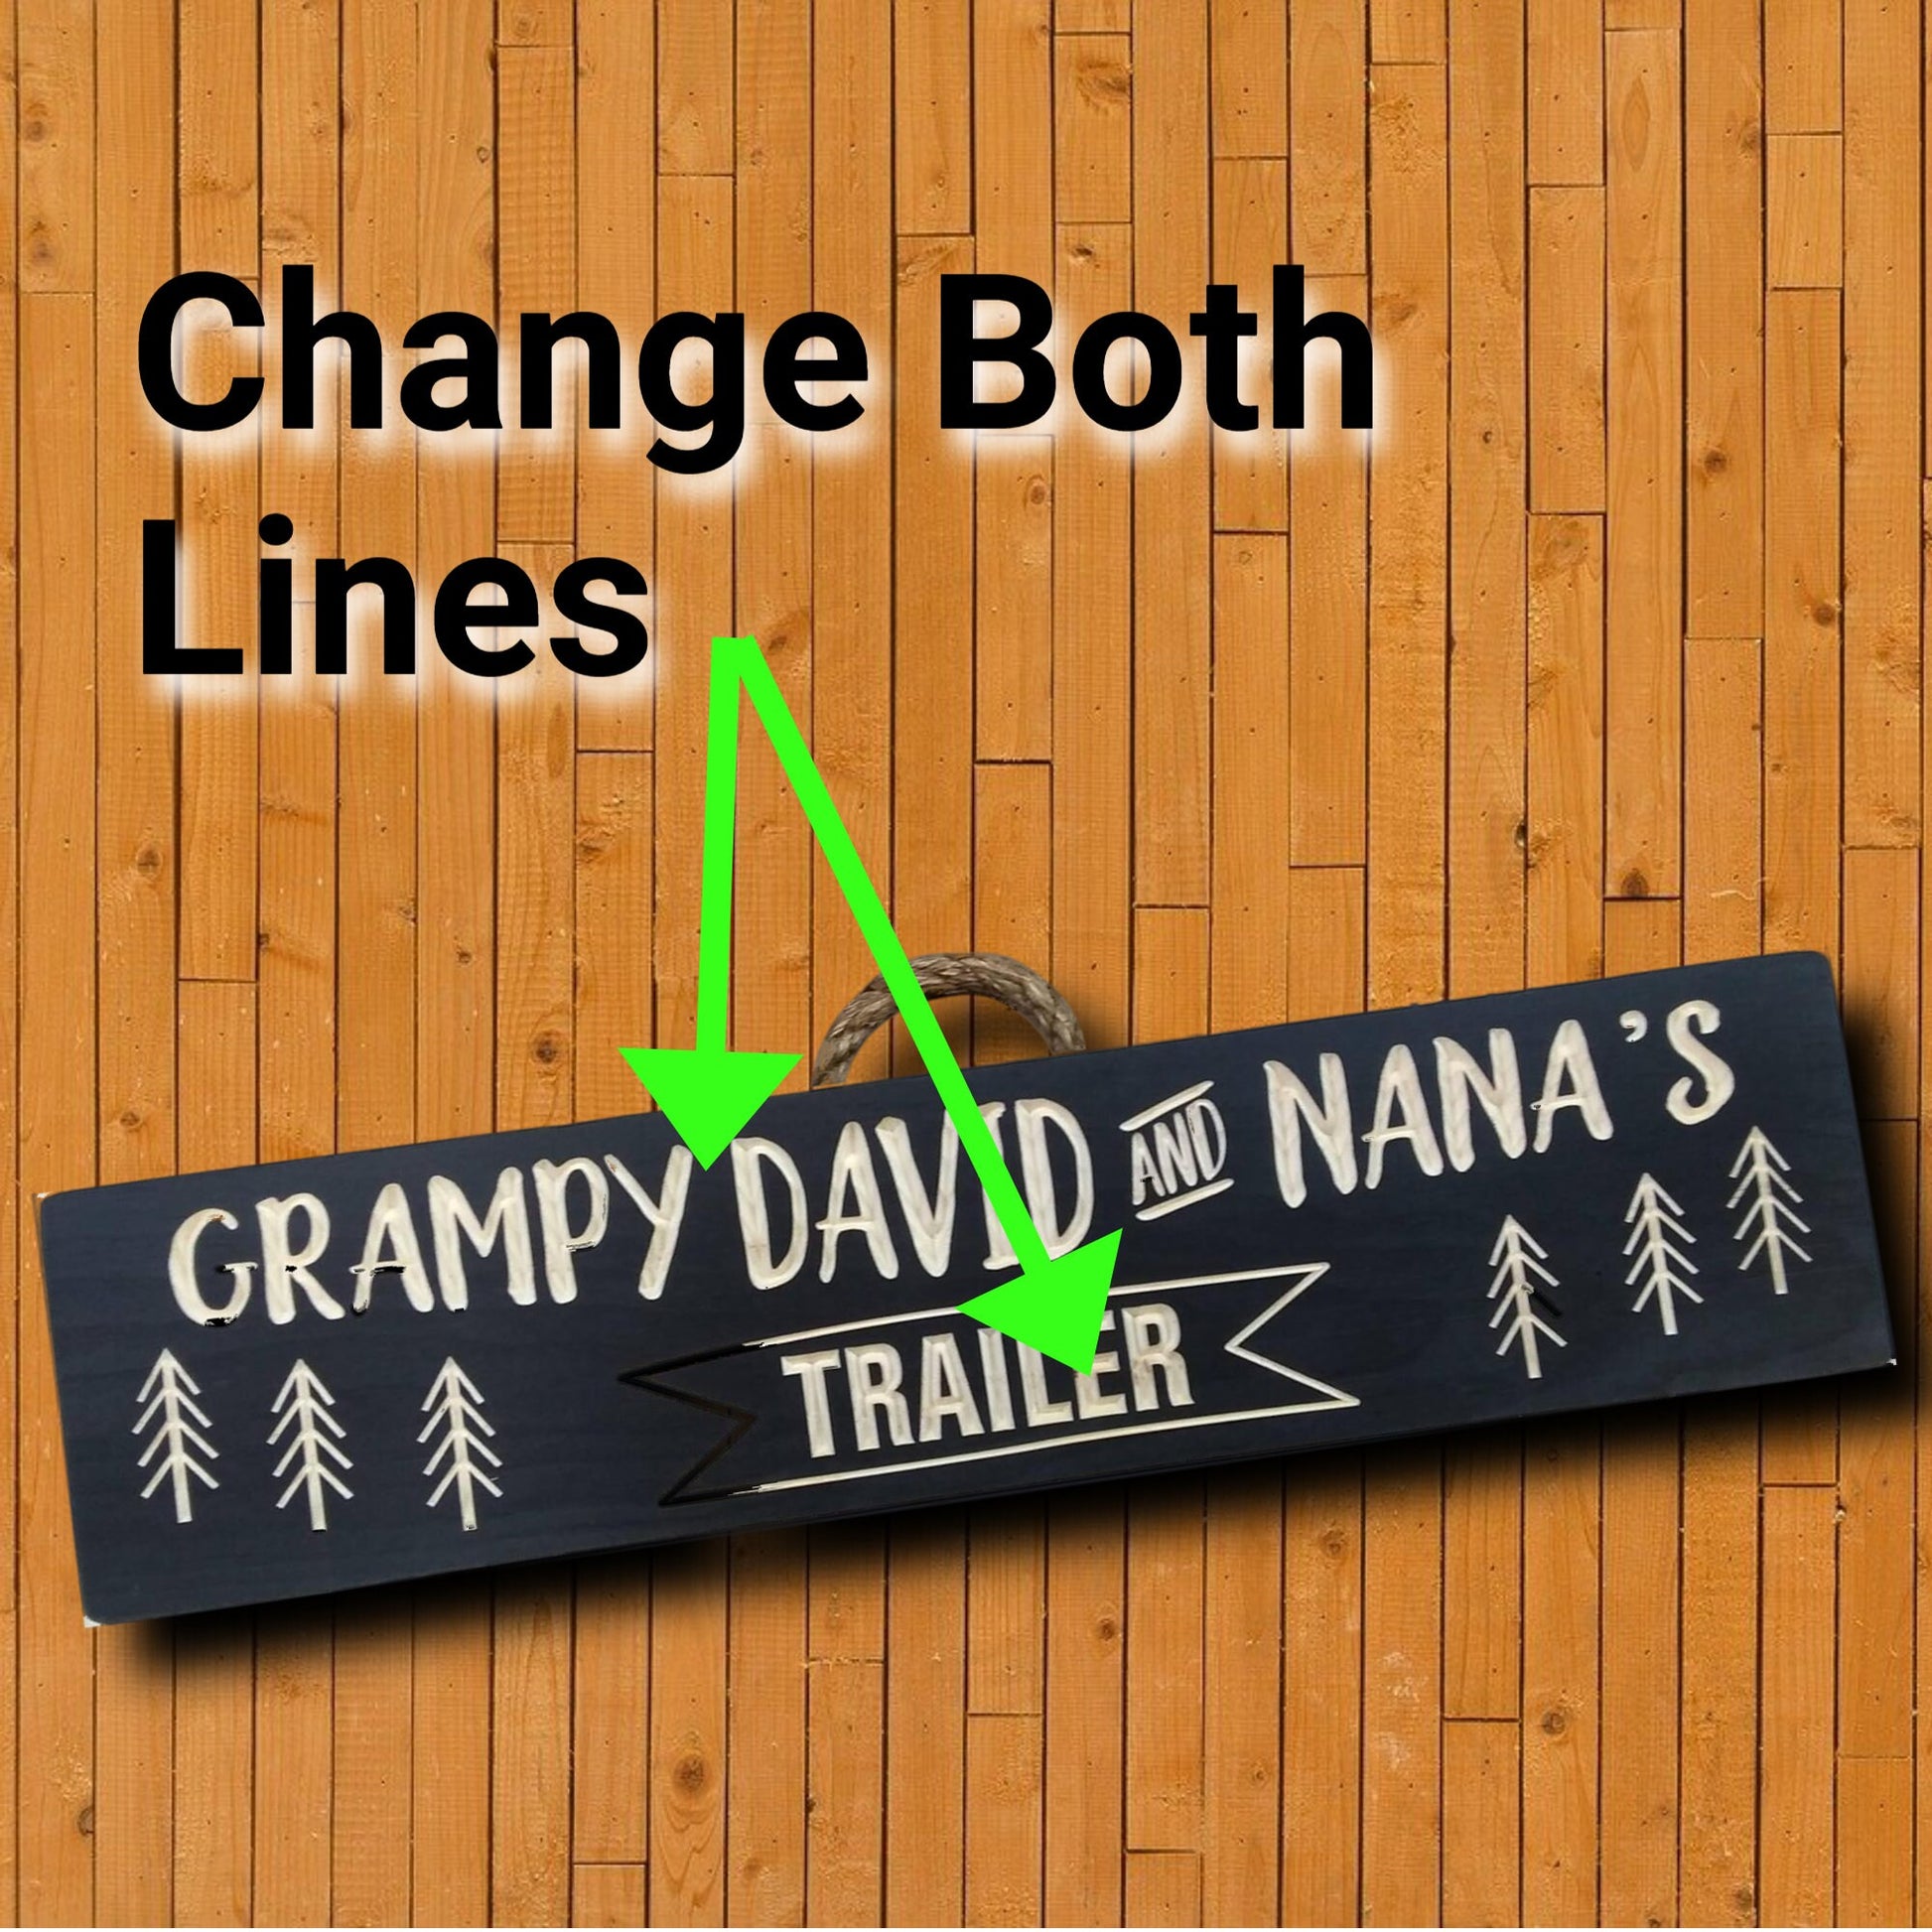 Grandma and Grandpa's sign, Personalized trailer sign, camping sign, grandparents sign